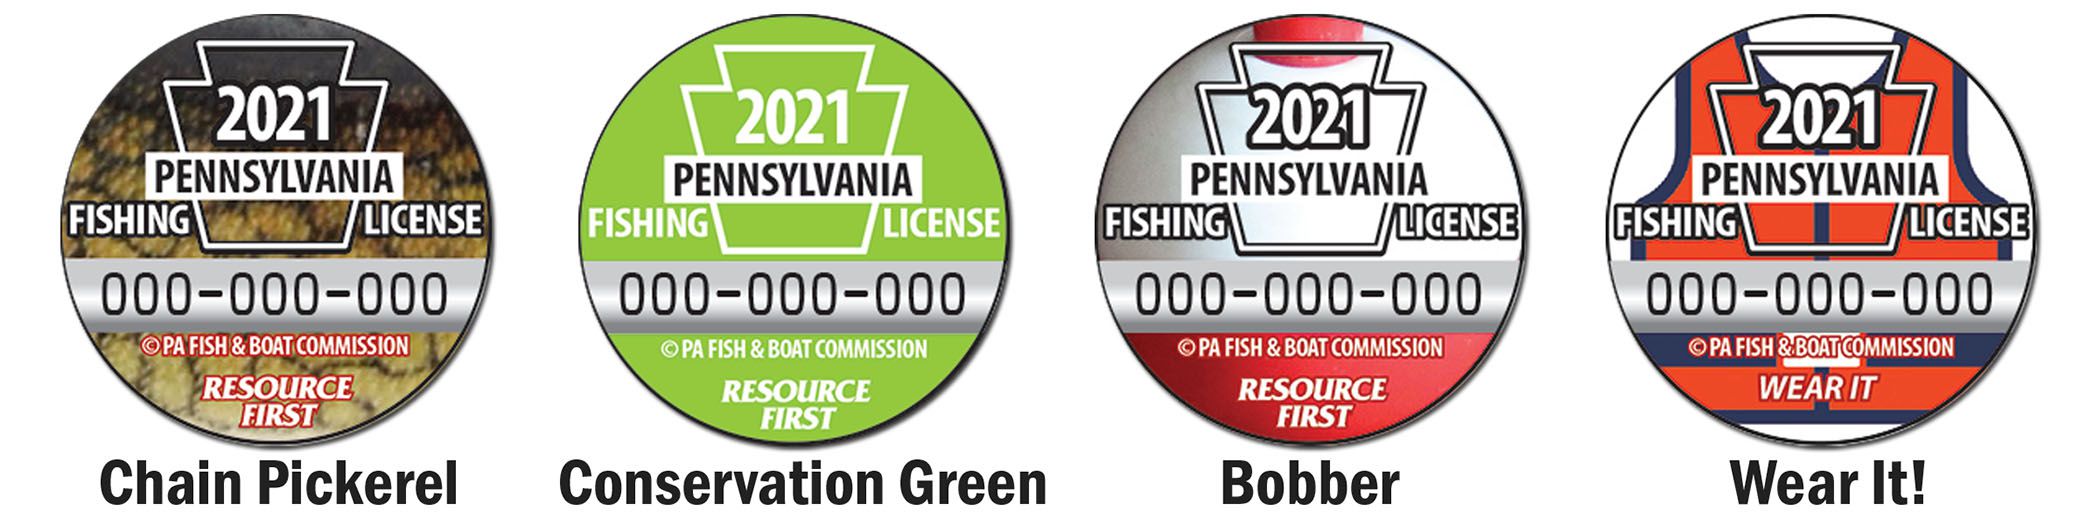 PA Fish and Boat Commission opens fishing button selection for 2021 